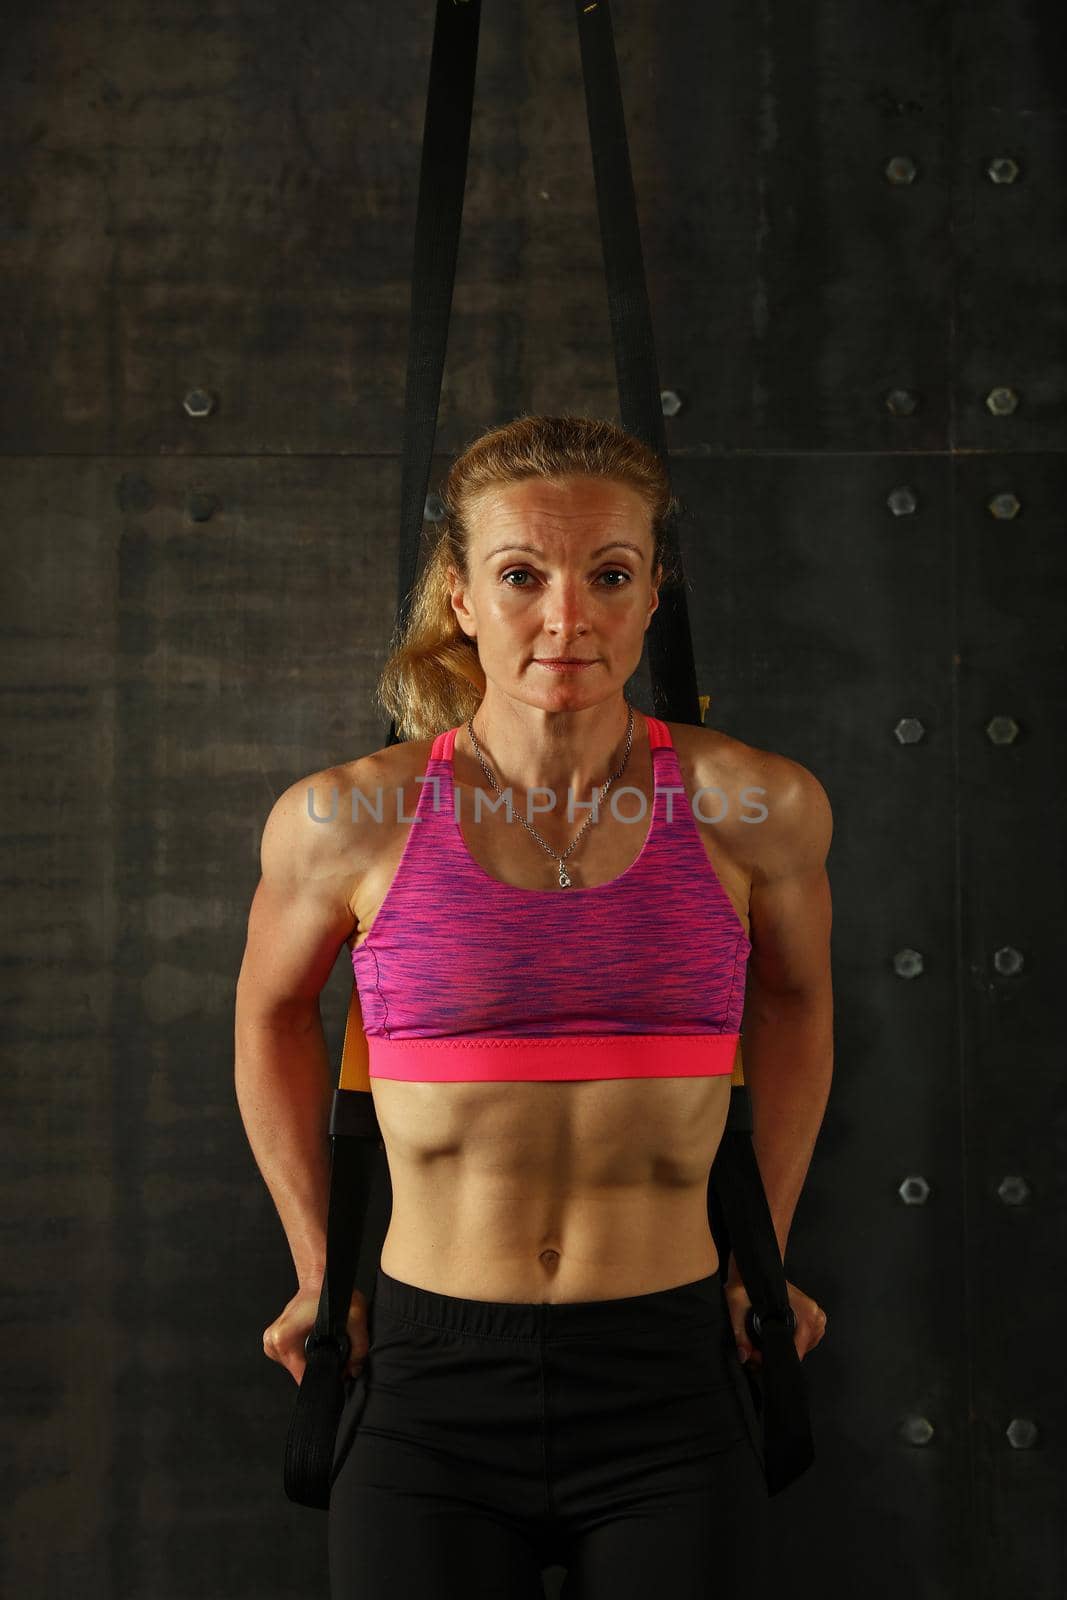 One young middle age athletic woman at crossfit training, exercising with trx suspension fitness straps over dark background, front view, looking at camera